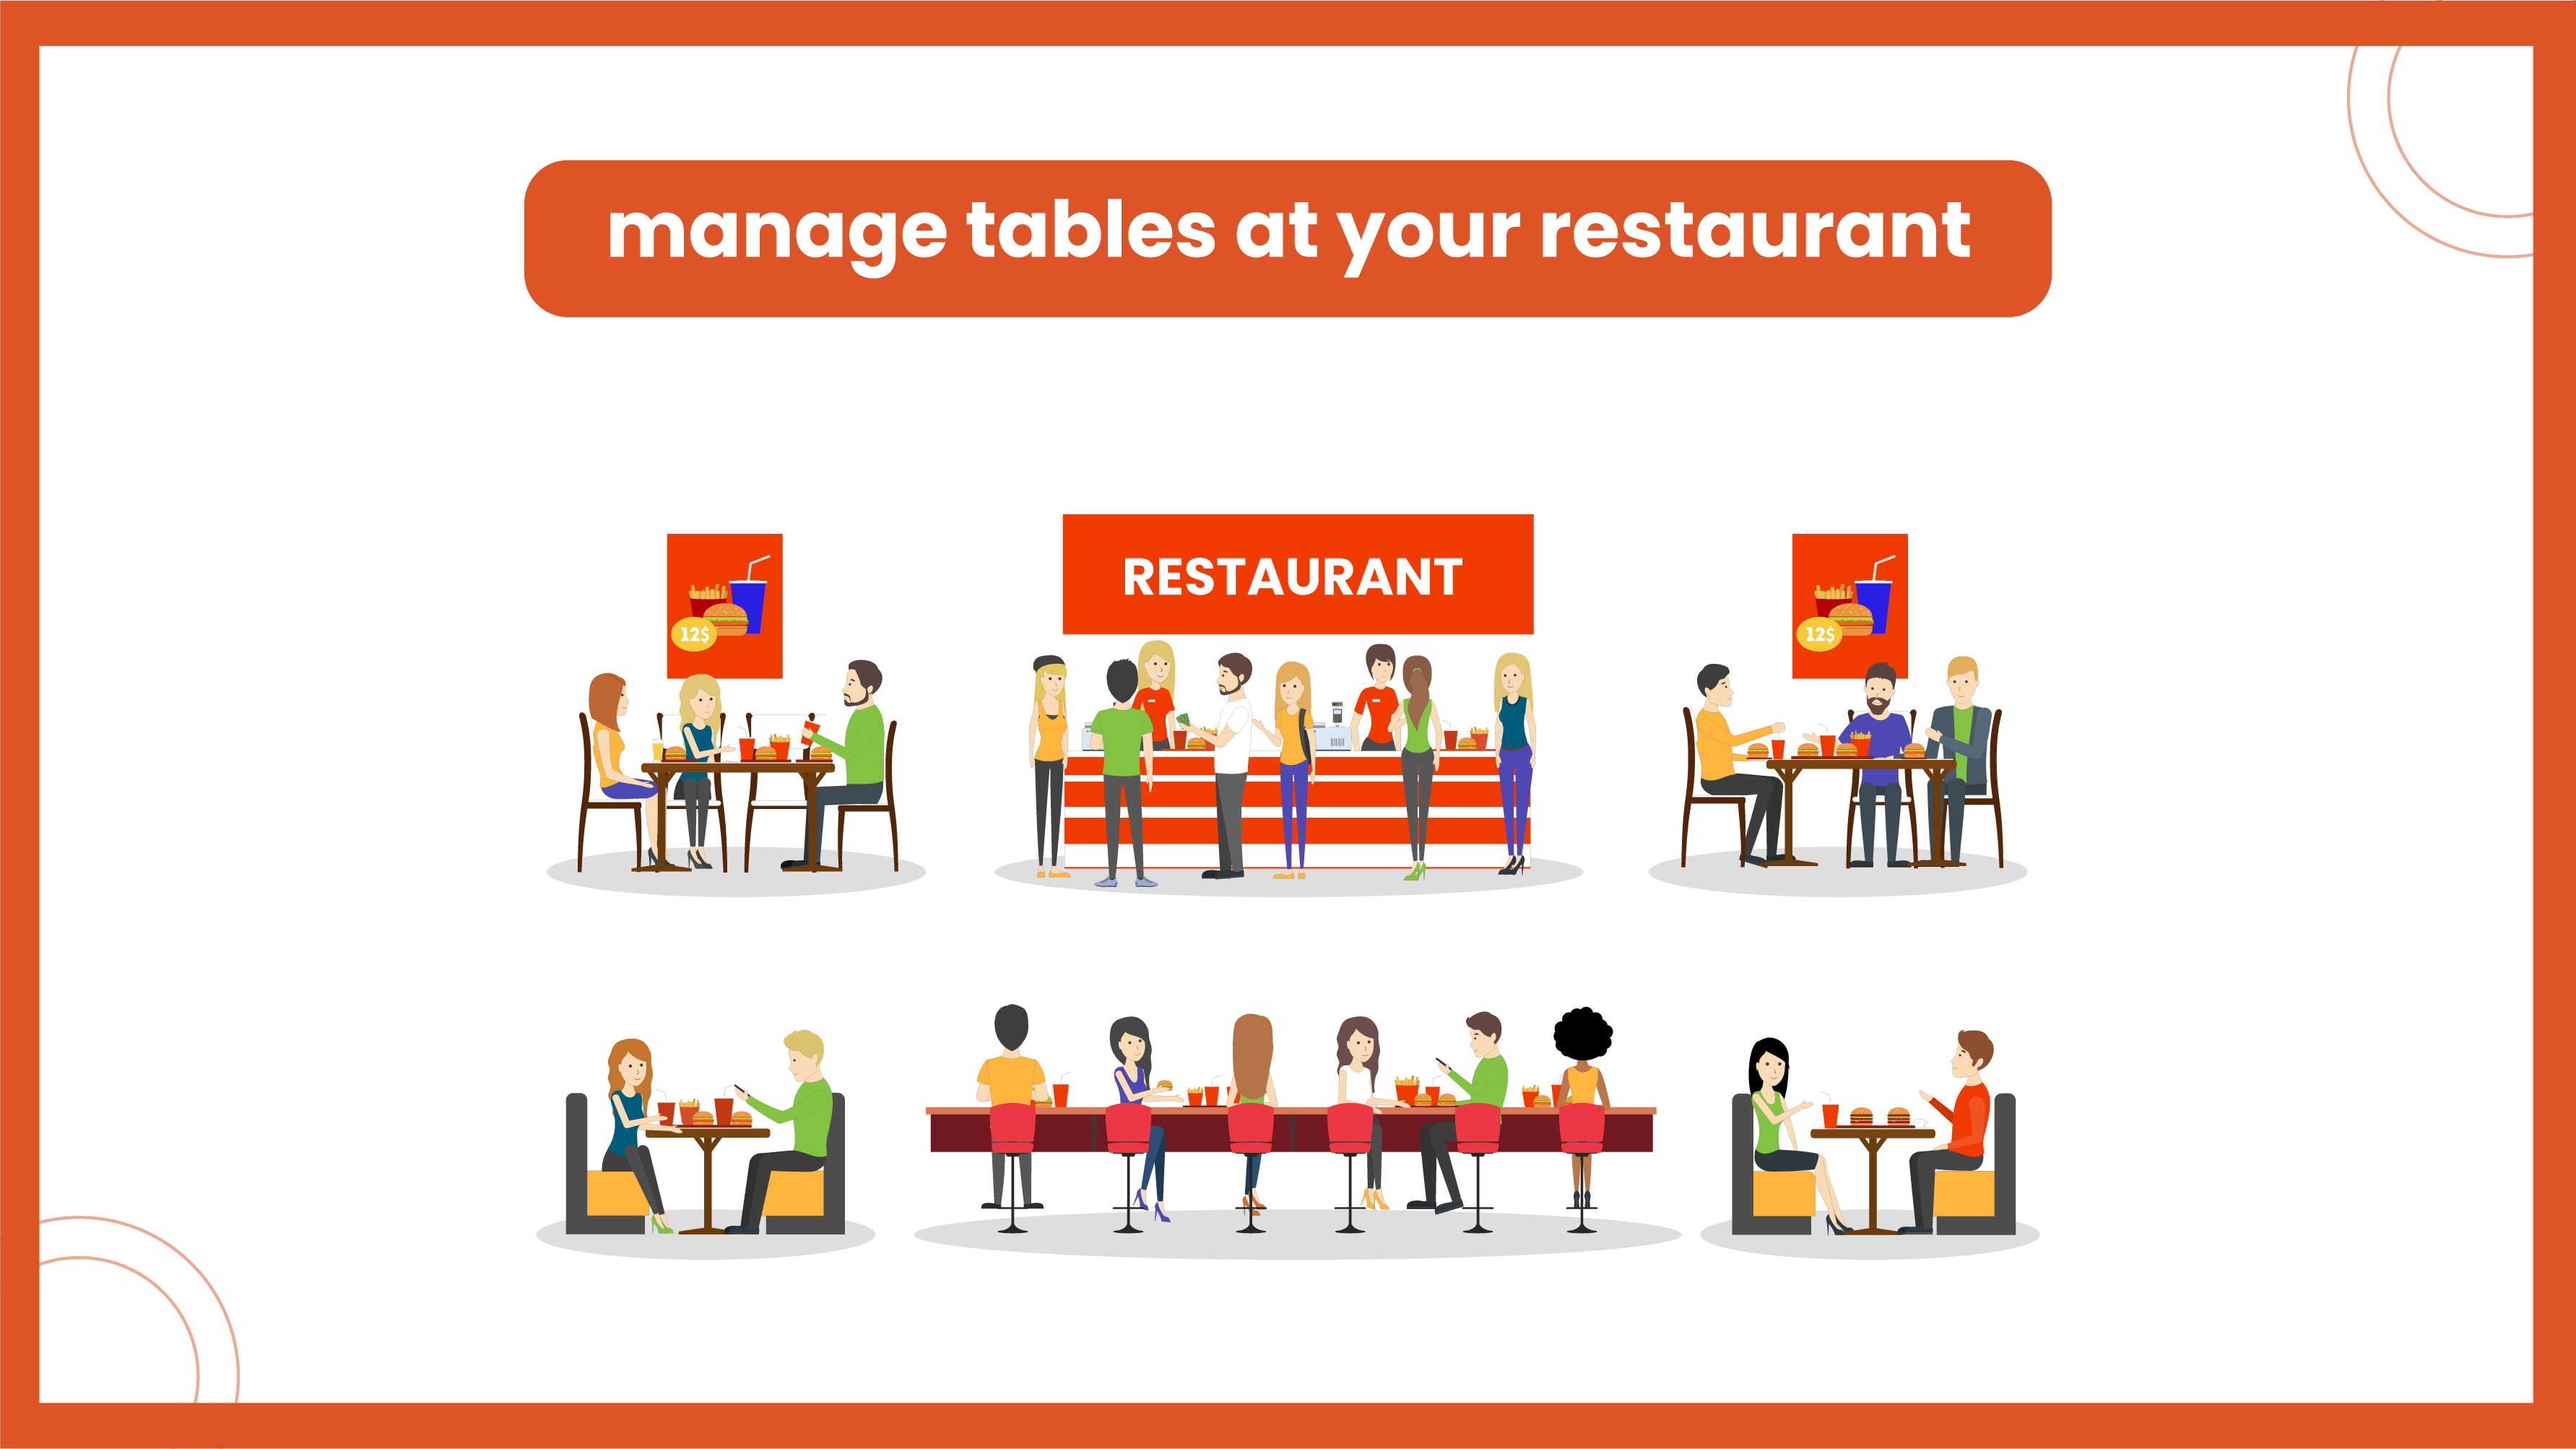 How to efficiently manage tables at your restaurant ?